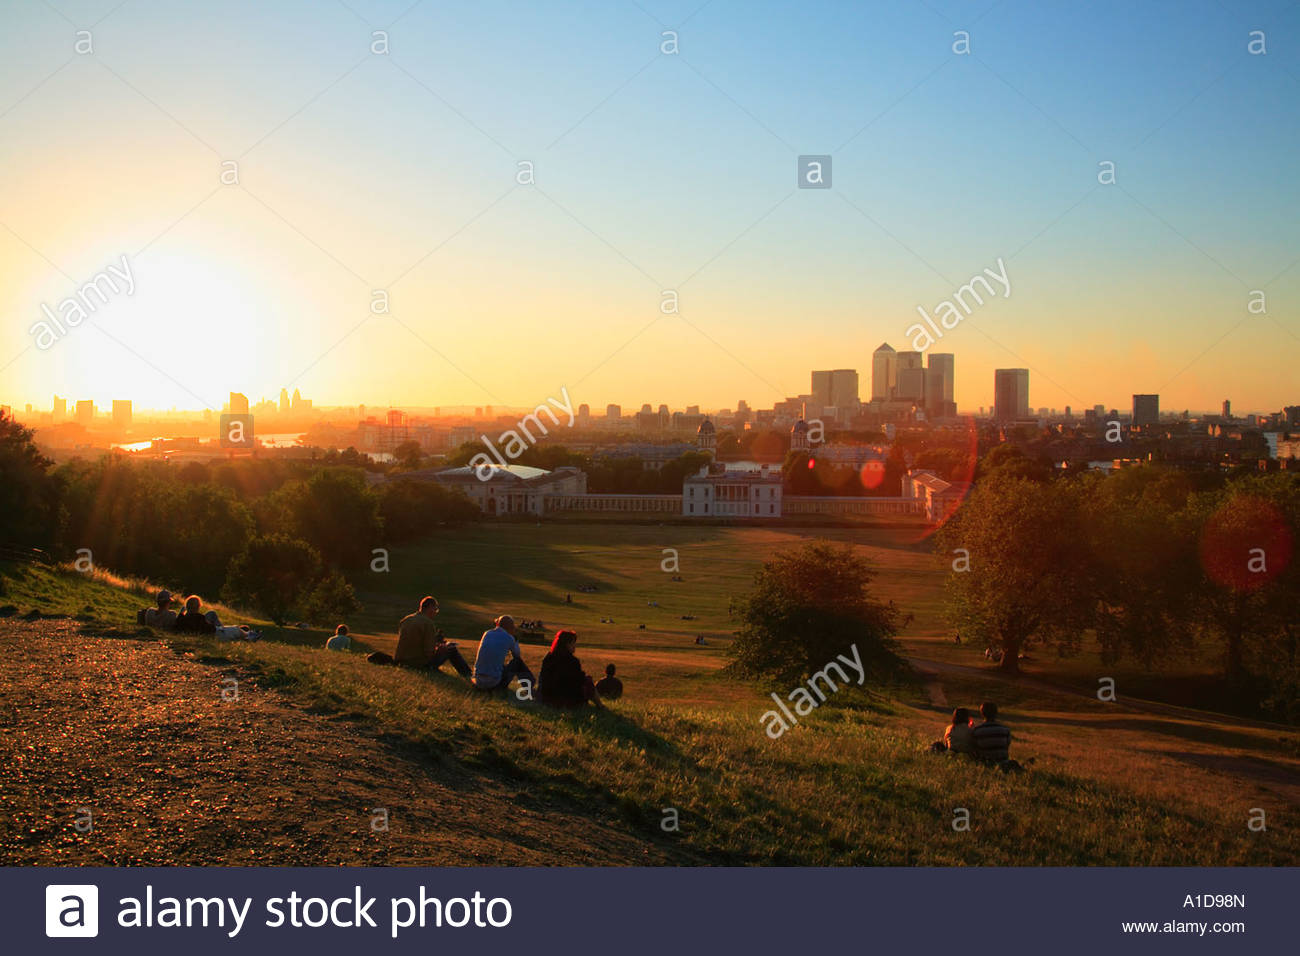 sunset-over-docklands-and-city-of-london-seen-from-observatory-hill-A1D98N.jpg